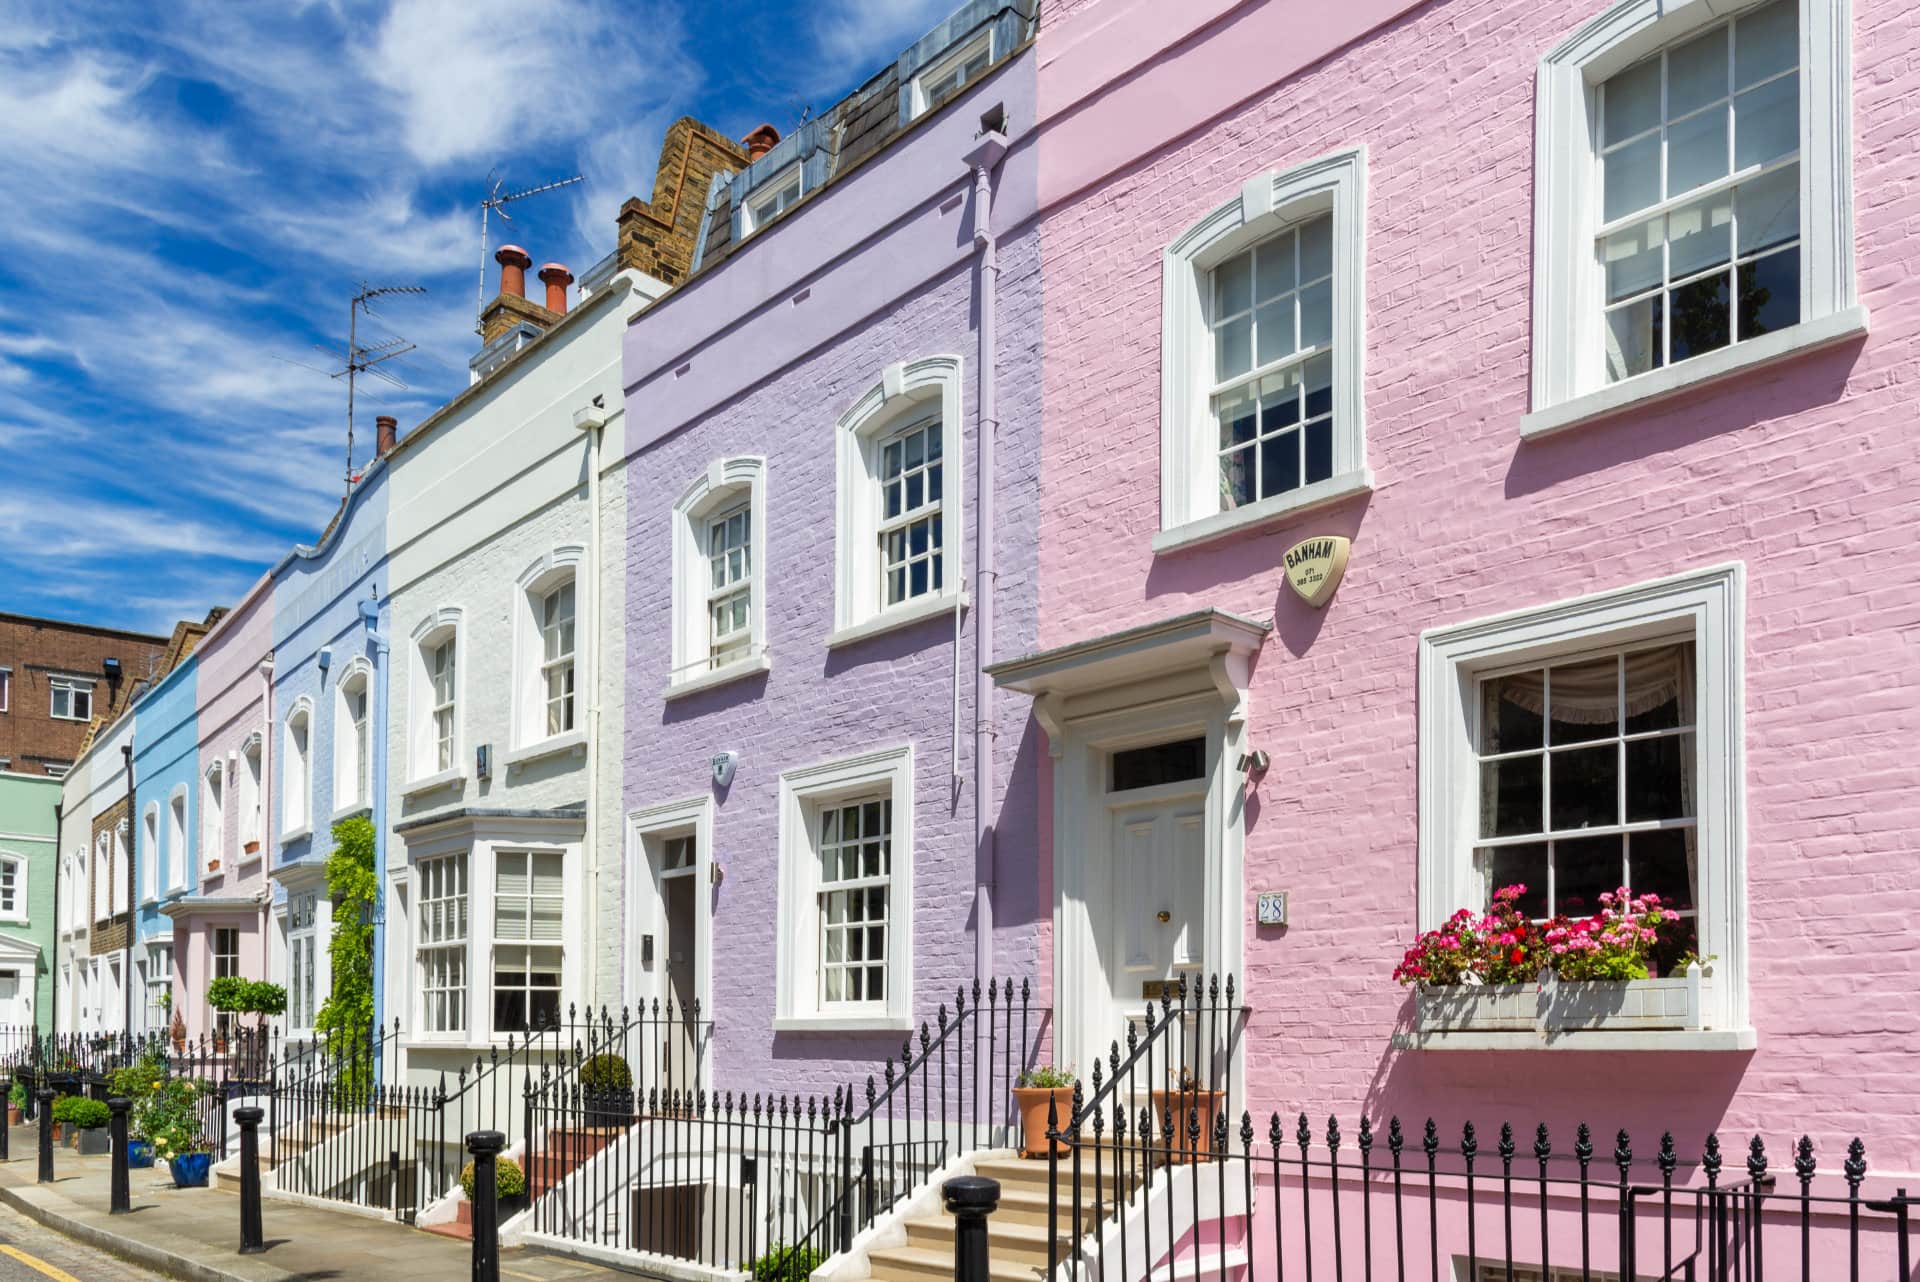 Colourful terraced town houses on Bywater Street, Chelsea, London, England, UK